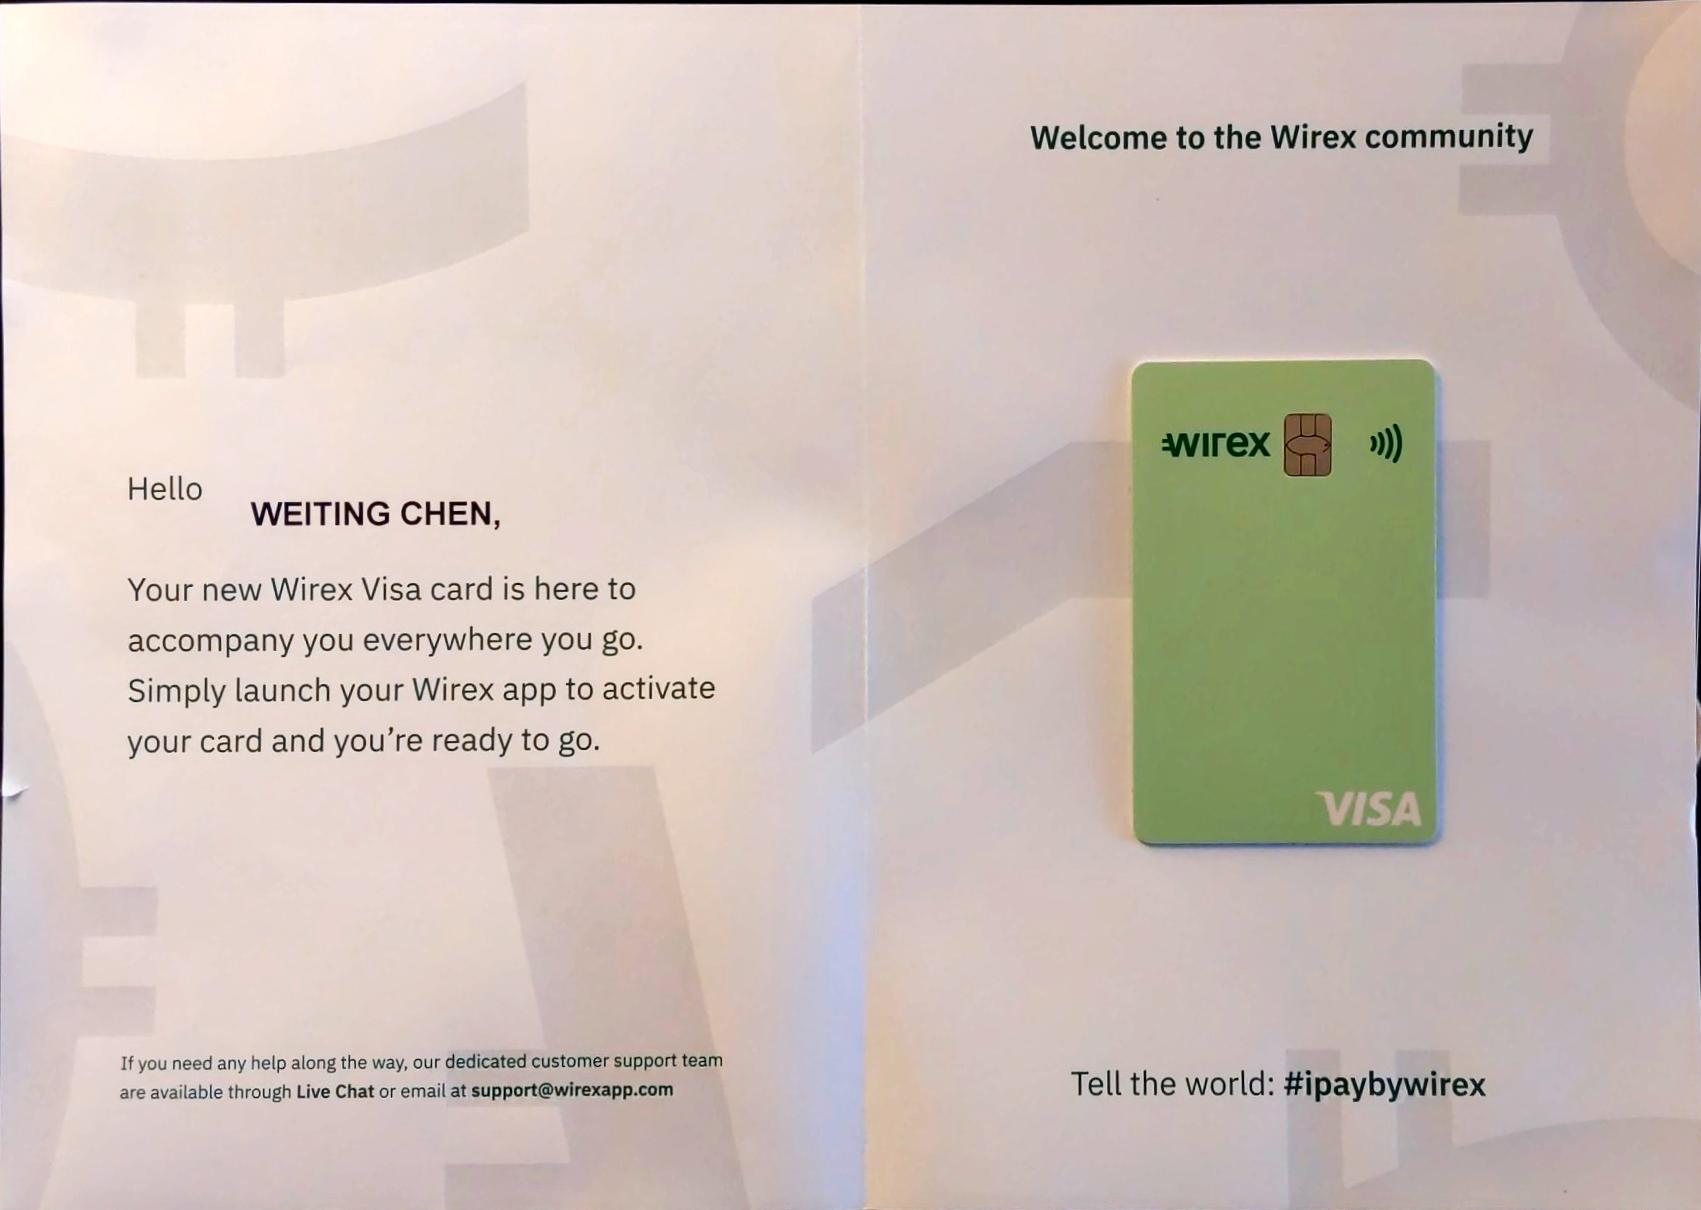 Letter from Wirex with card attached